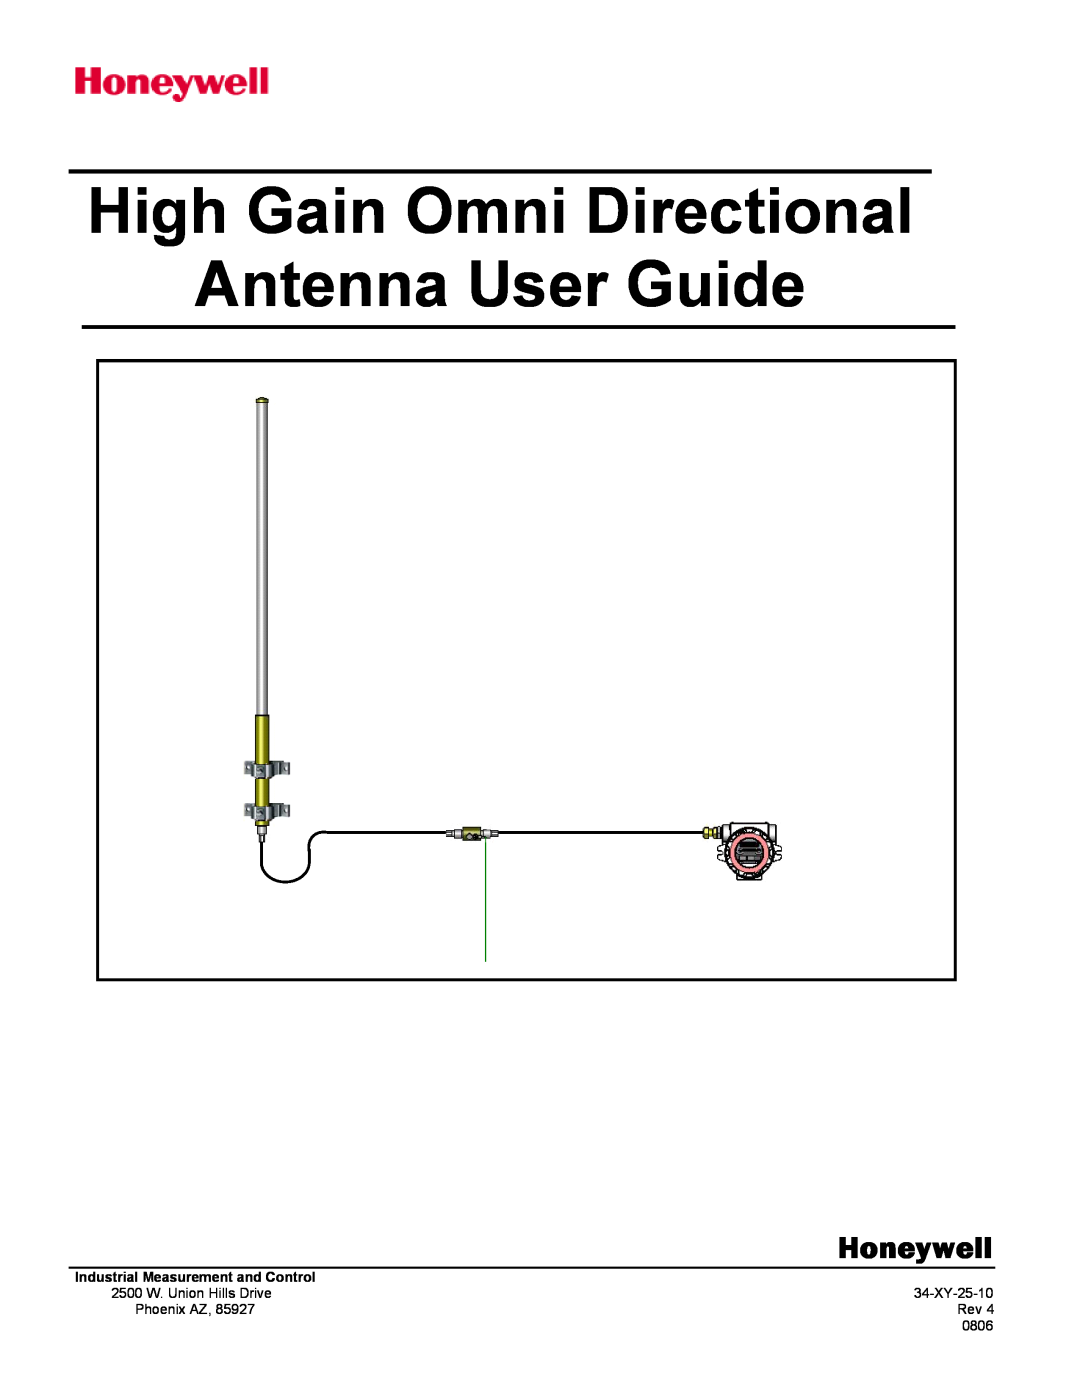 Honeywell manual Honeywell, High Gain Omni Directional Antenna User Guide, Industrial Measurement and Control 